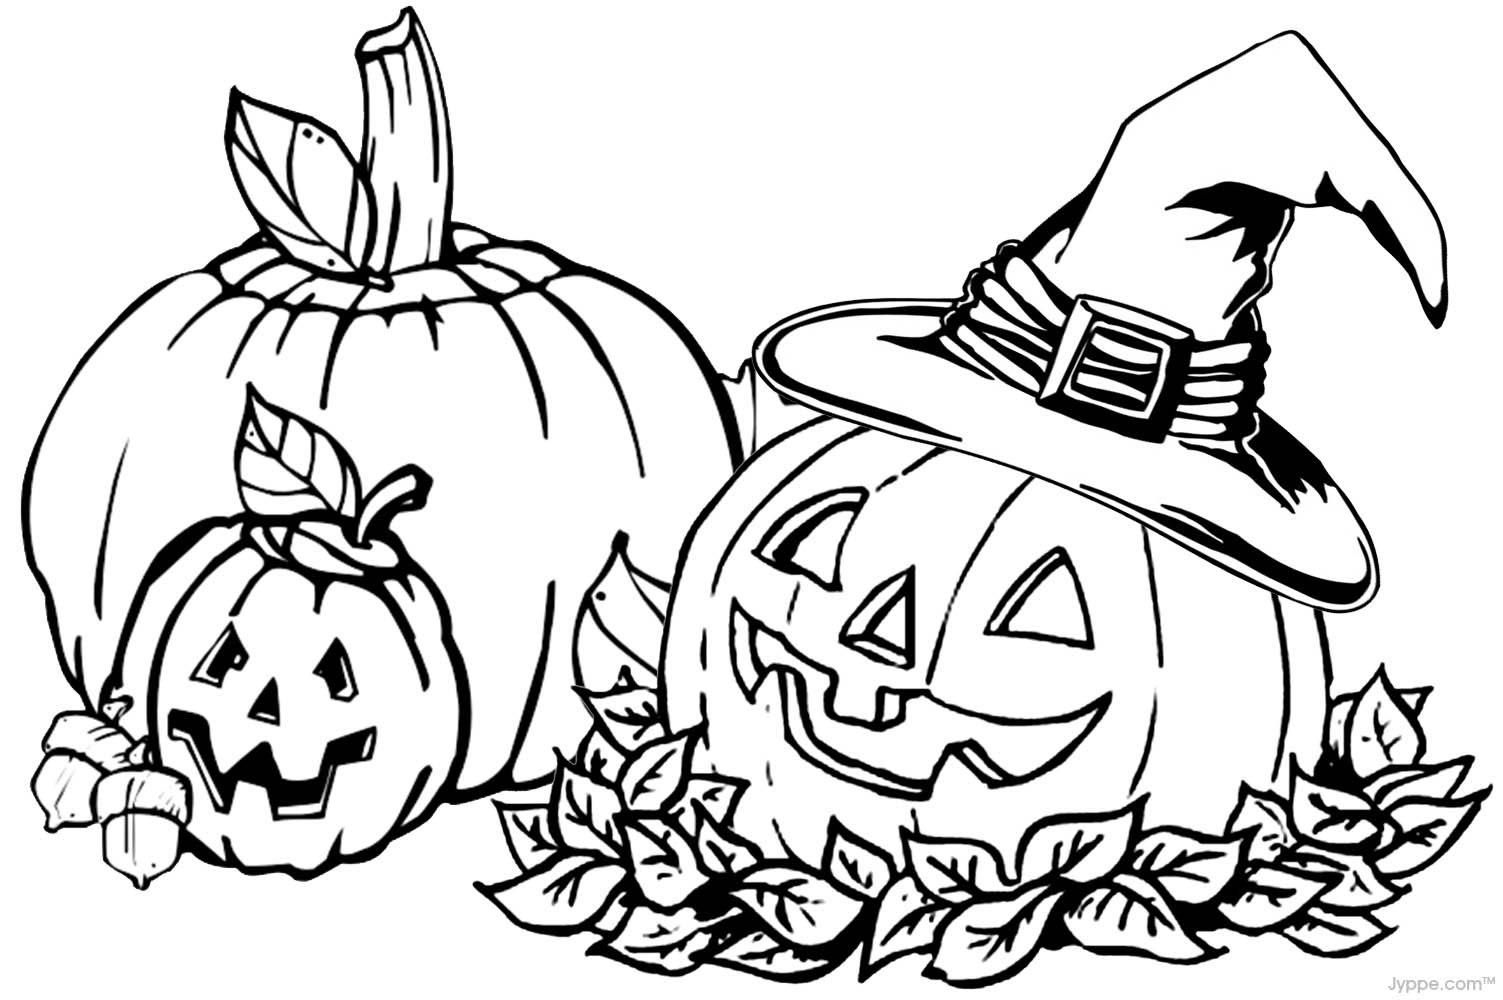 Fall Halloween Pumpkin Coloring For Kids coloring page